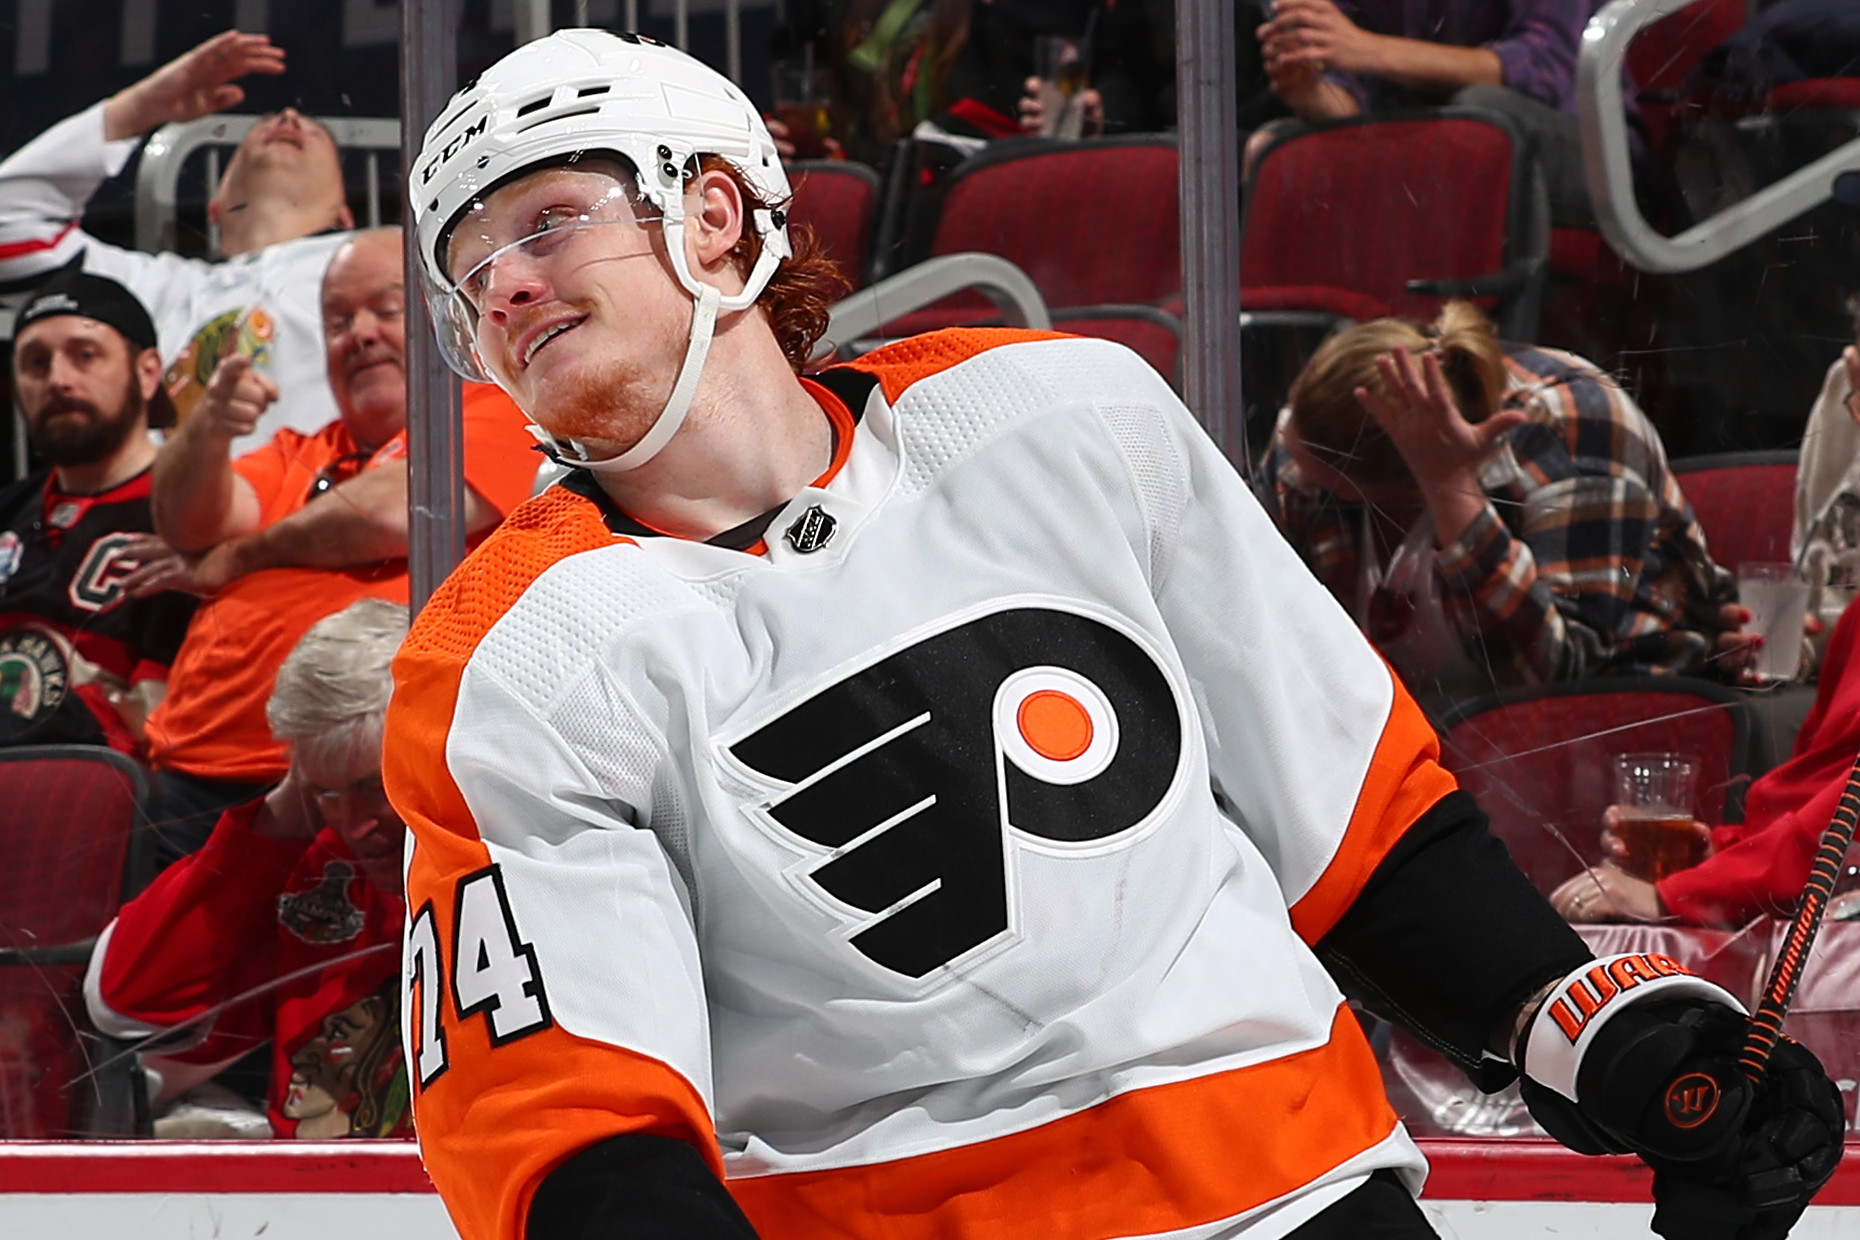 Flyers to get new uniforms next season, per report - Flyers Nation